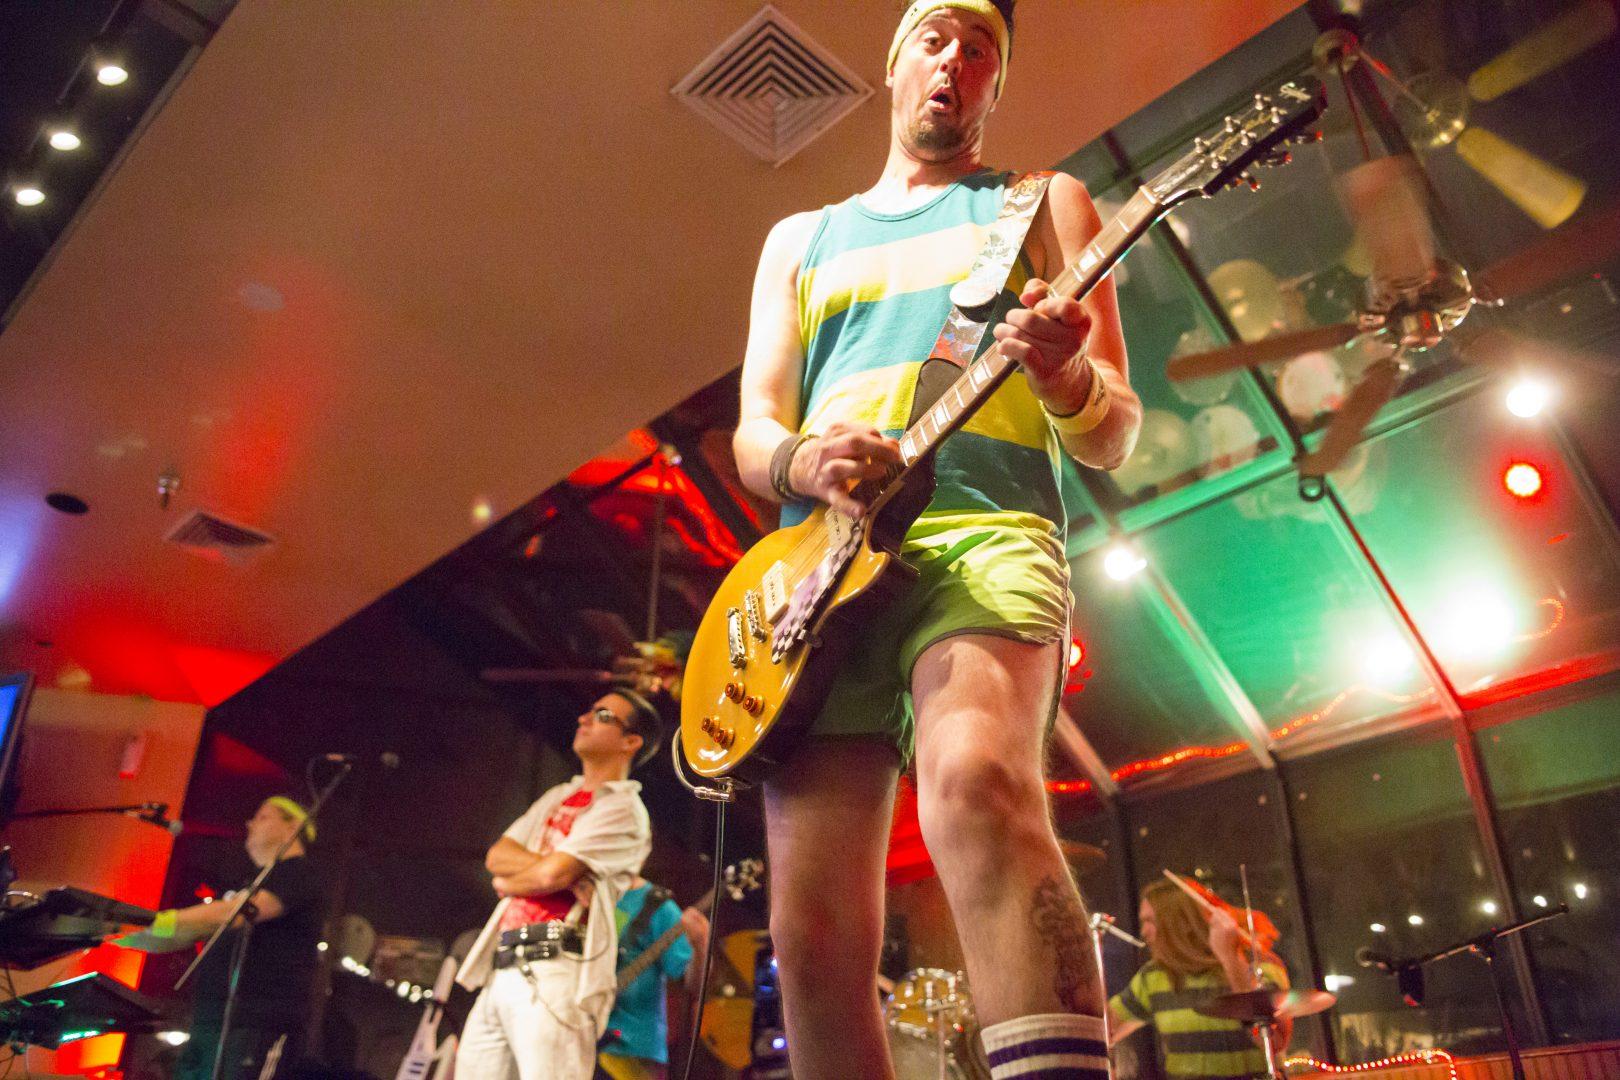 Photos by Katie Eleneke / The Collegian
80s local cover band Max Headroom performed at The Bucket. The group pllayed classic songs from the era while dressed in 80s attire.